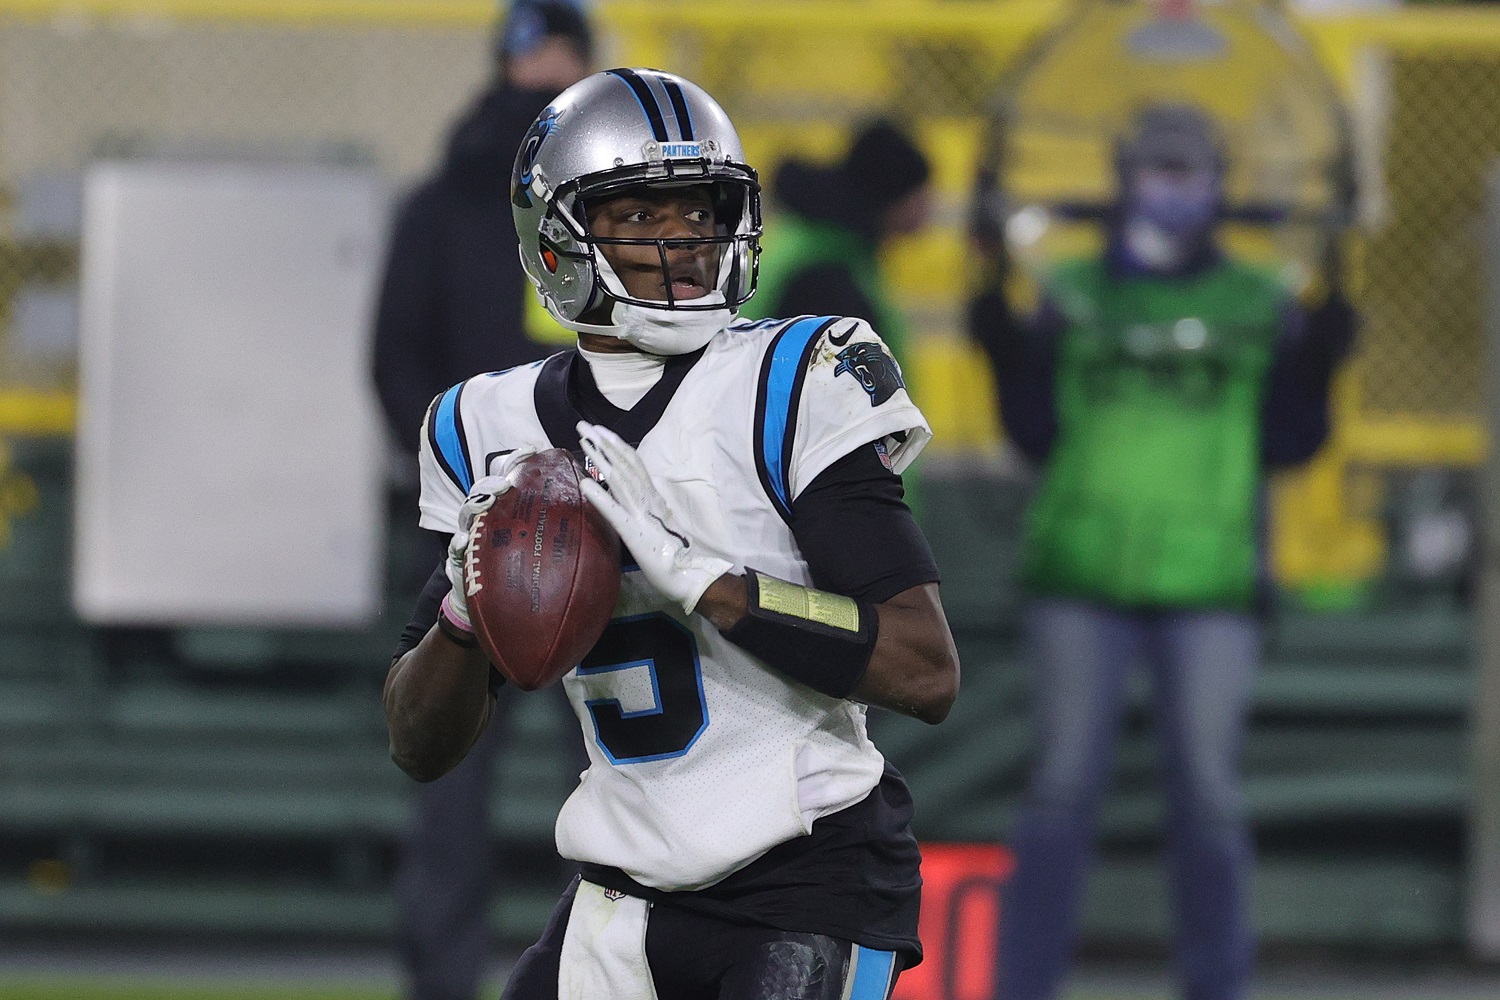 Teddy Bridgewater drops back to pass during a Carolina Panthers game against the Green Bay Packers on Dec. 19, 2020.